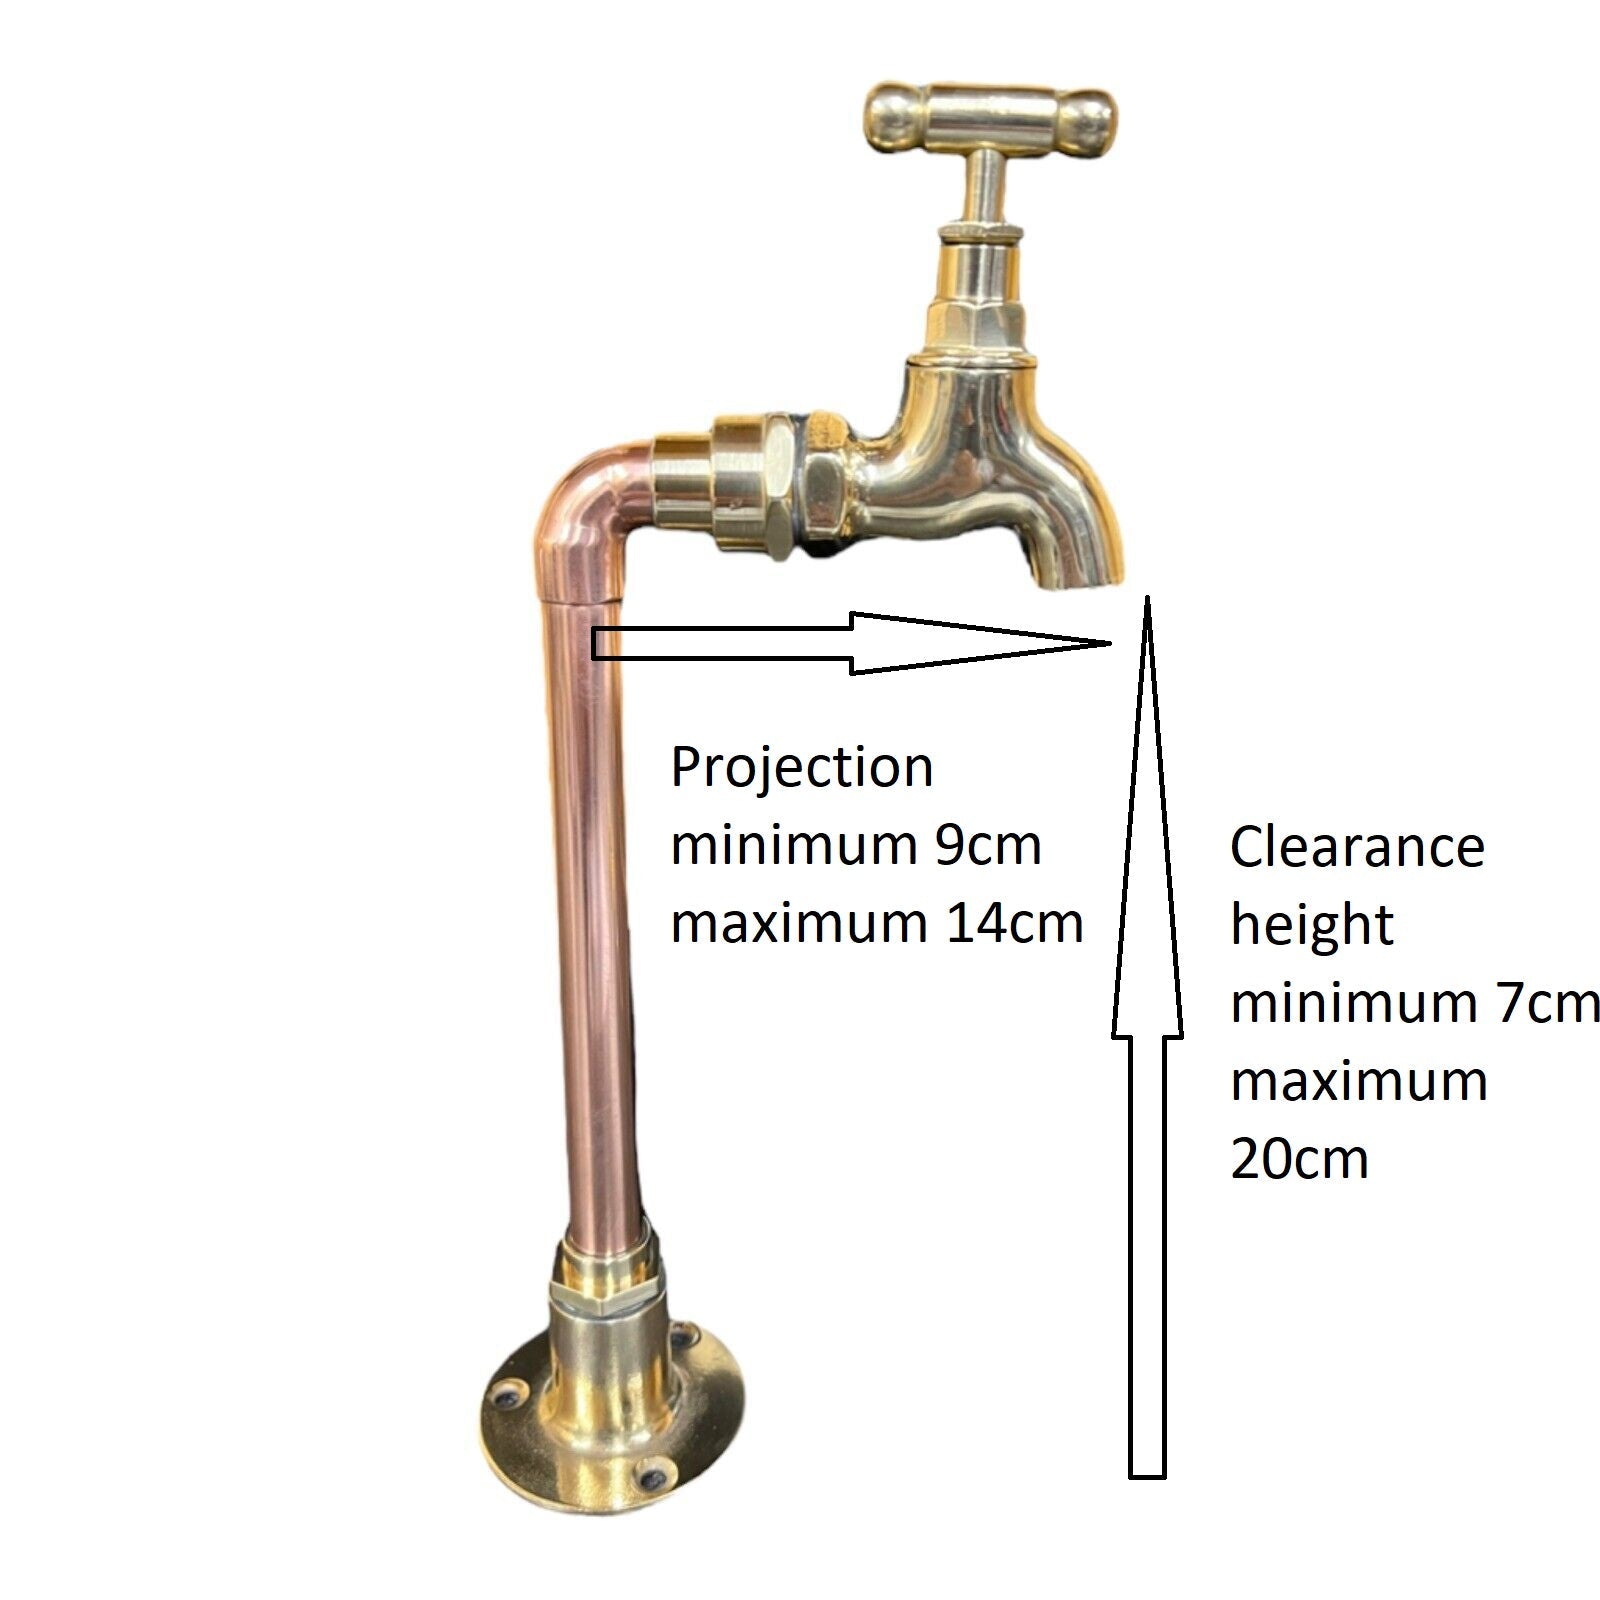 Made to measure small brass tap with copper pipework